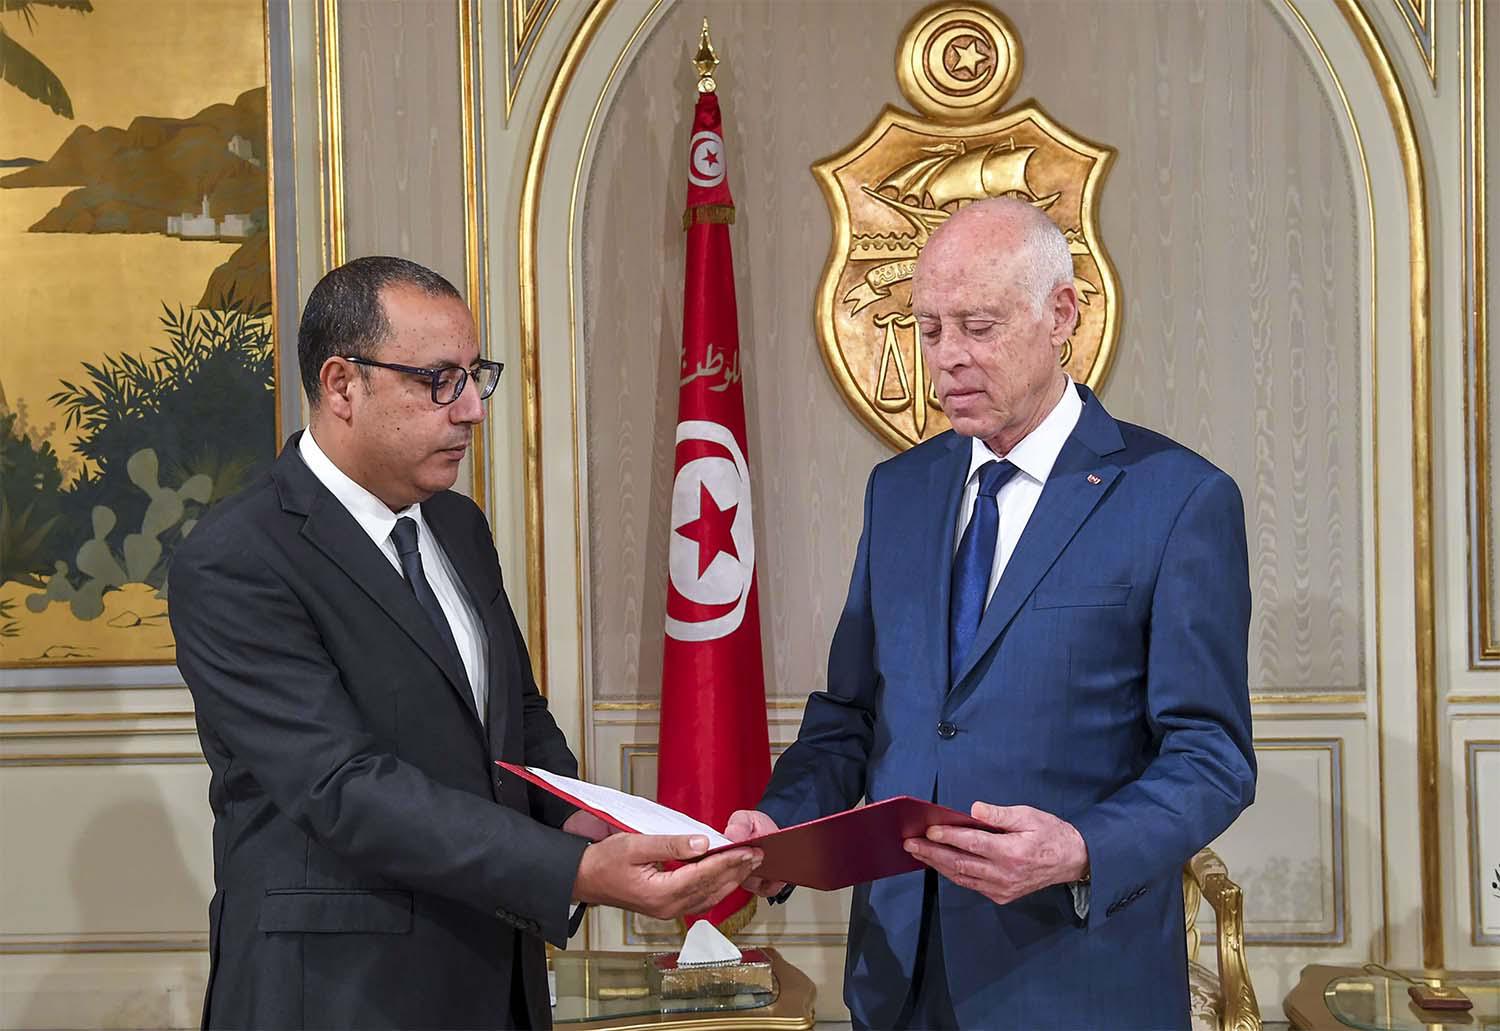 Tunisia's Prime Minister-designate Hichem Mechichi (L) presenting his cabinet list for Tunisian President Kais Saied (R) in Carthage palace